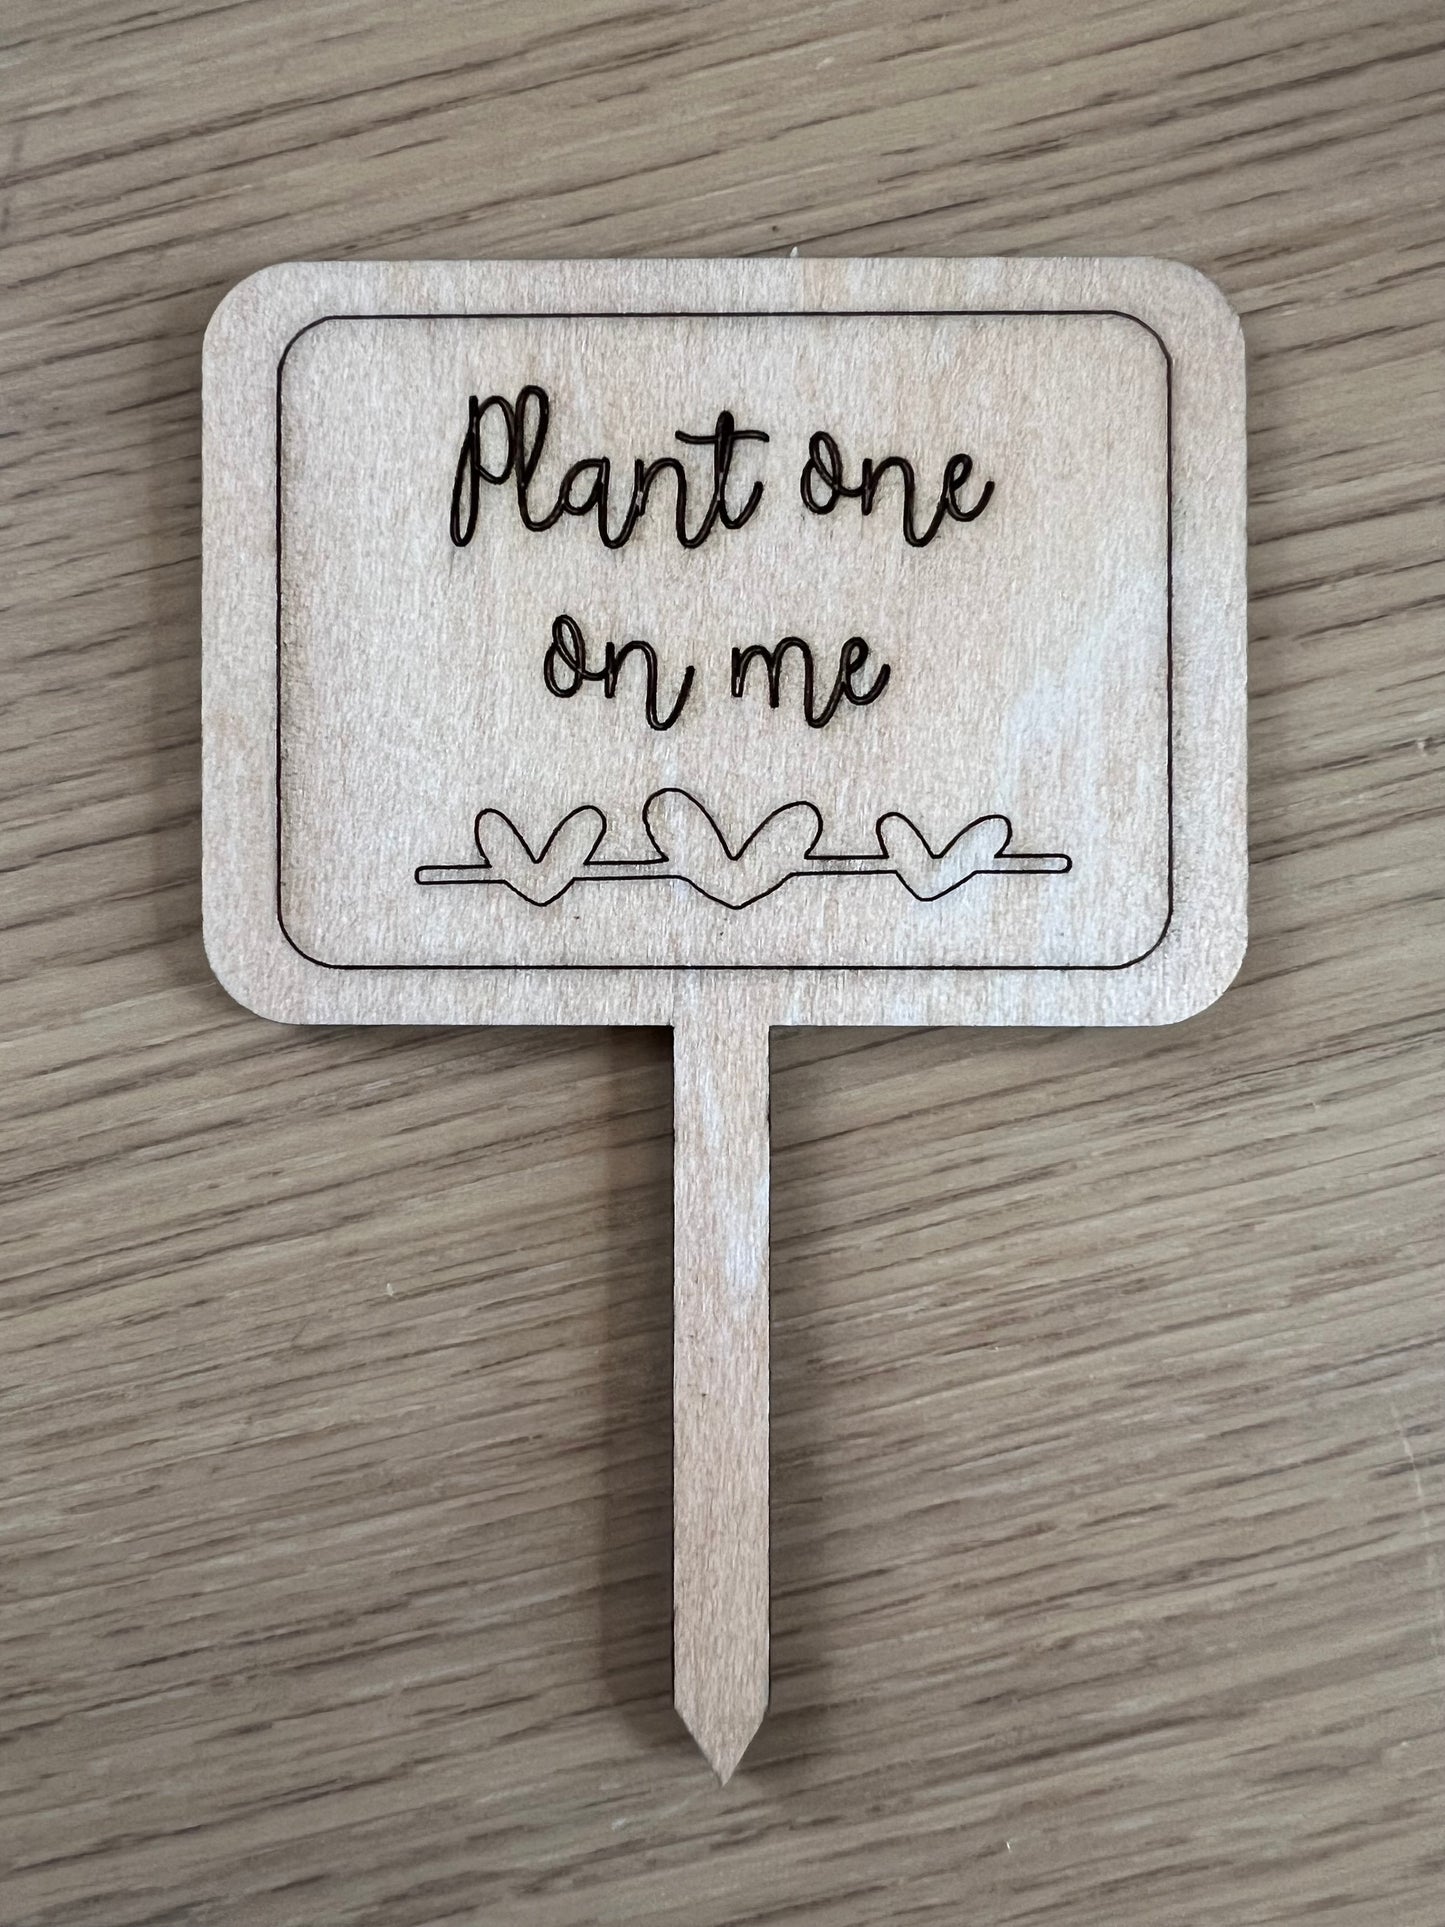 Funny plant stakes